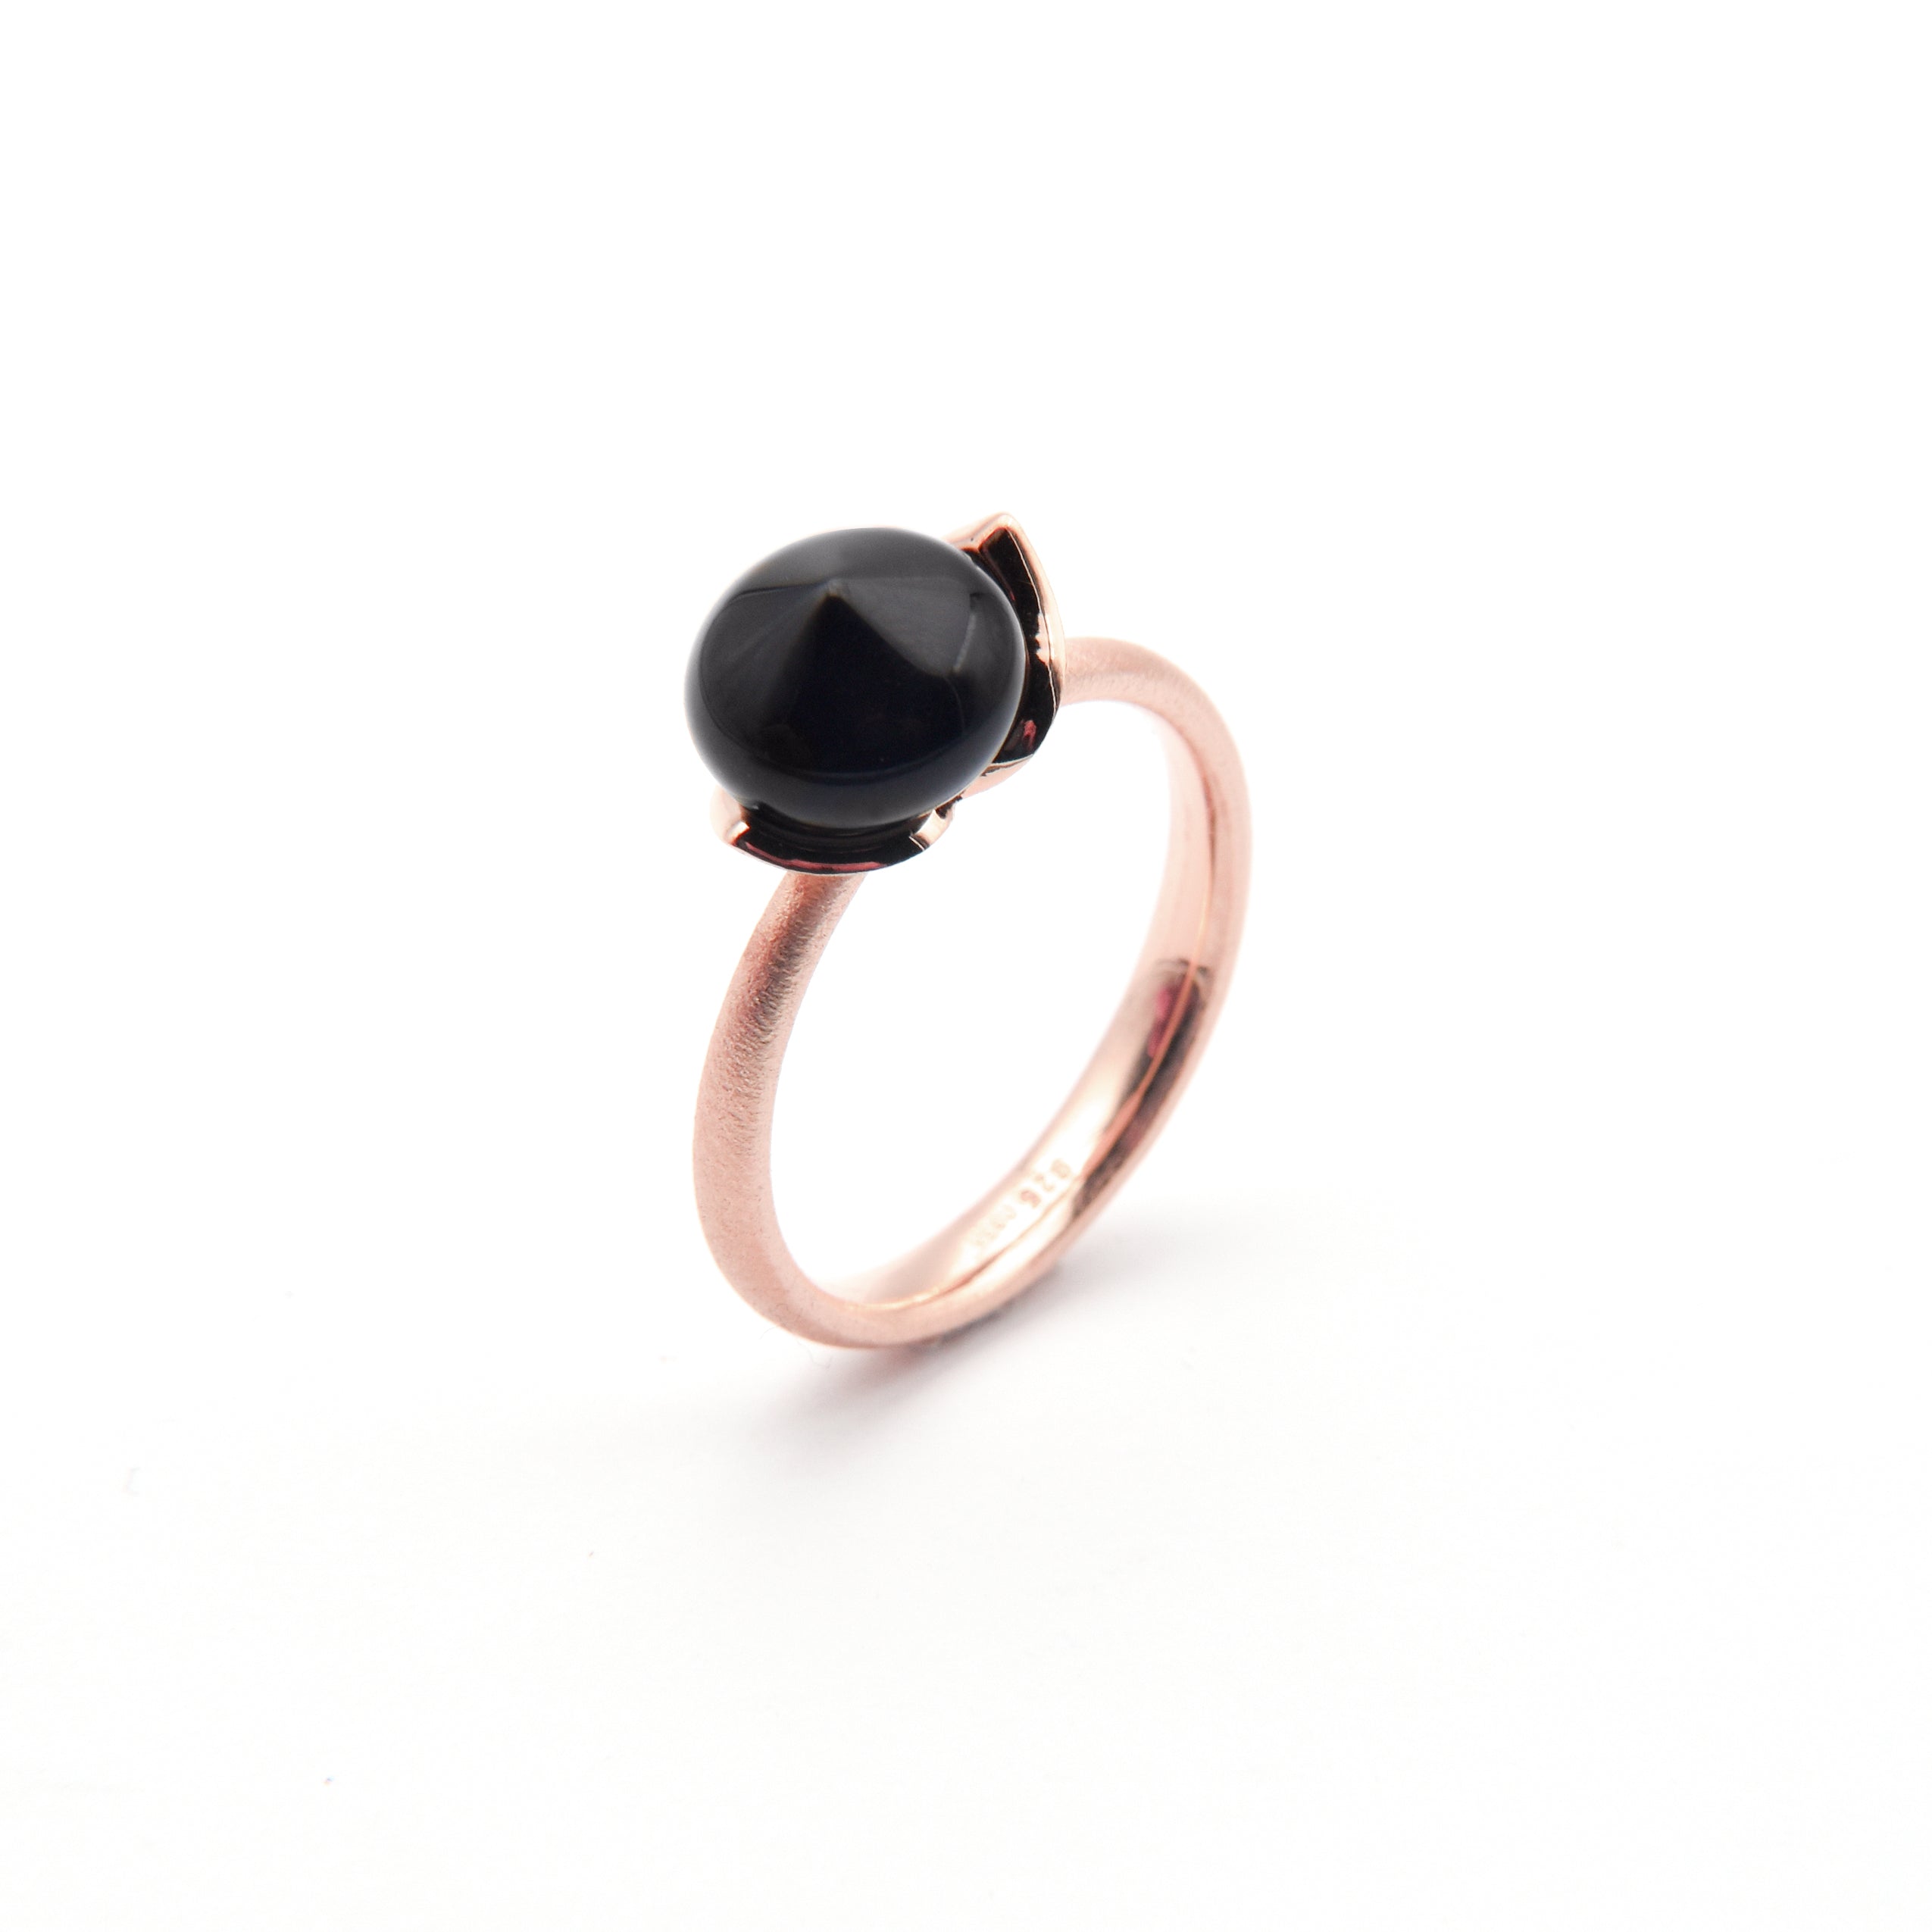 Dolce-ring "smal" med onix 925/-.